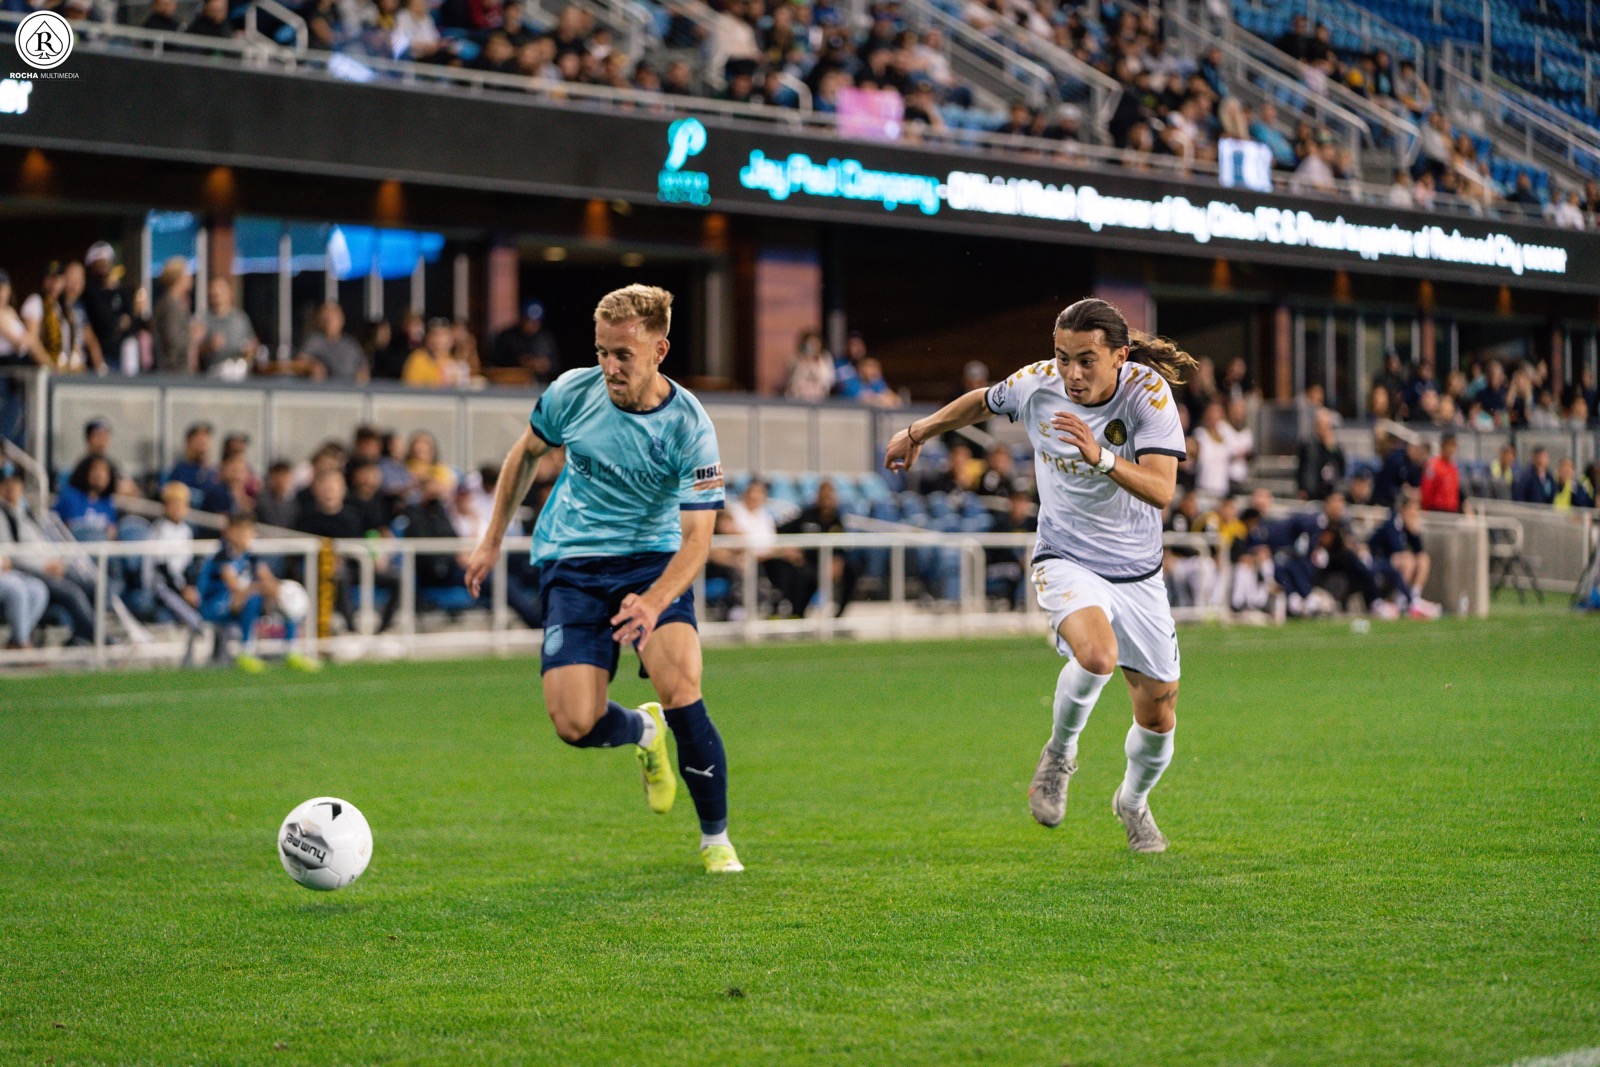 Bay Cities FC to face off against San Jose Earthquakes in the U.S. Open Cup 